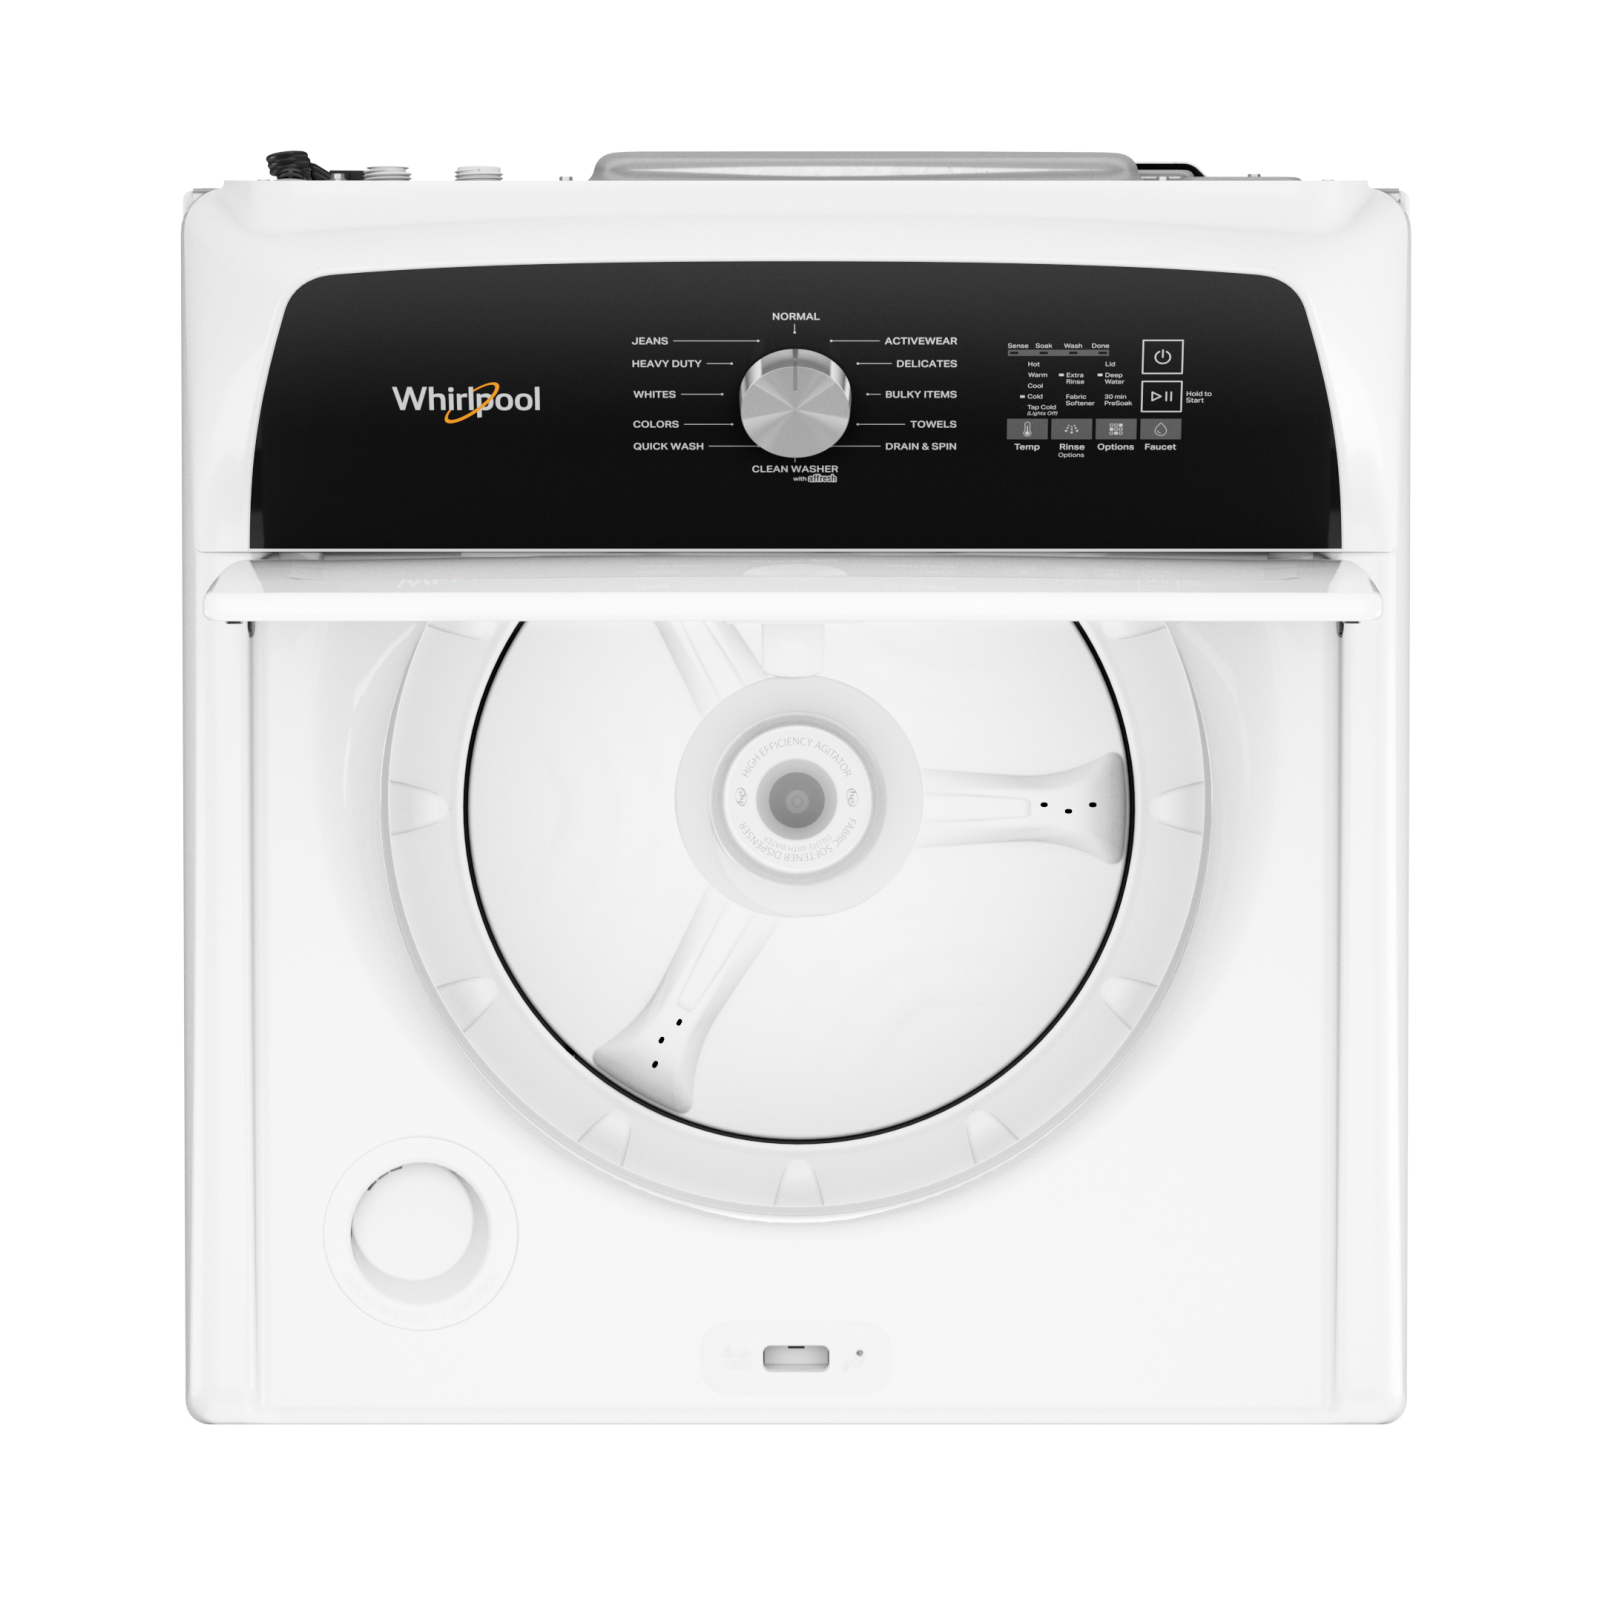 Whirlpool - 5.2 cu. Ft  Top Load Washer in White - WTW5015LW